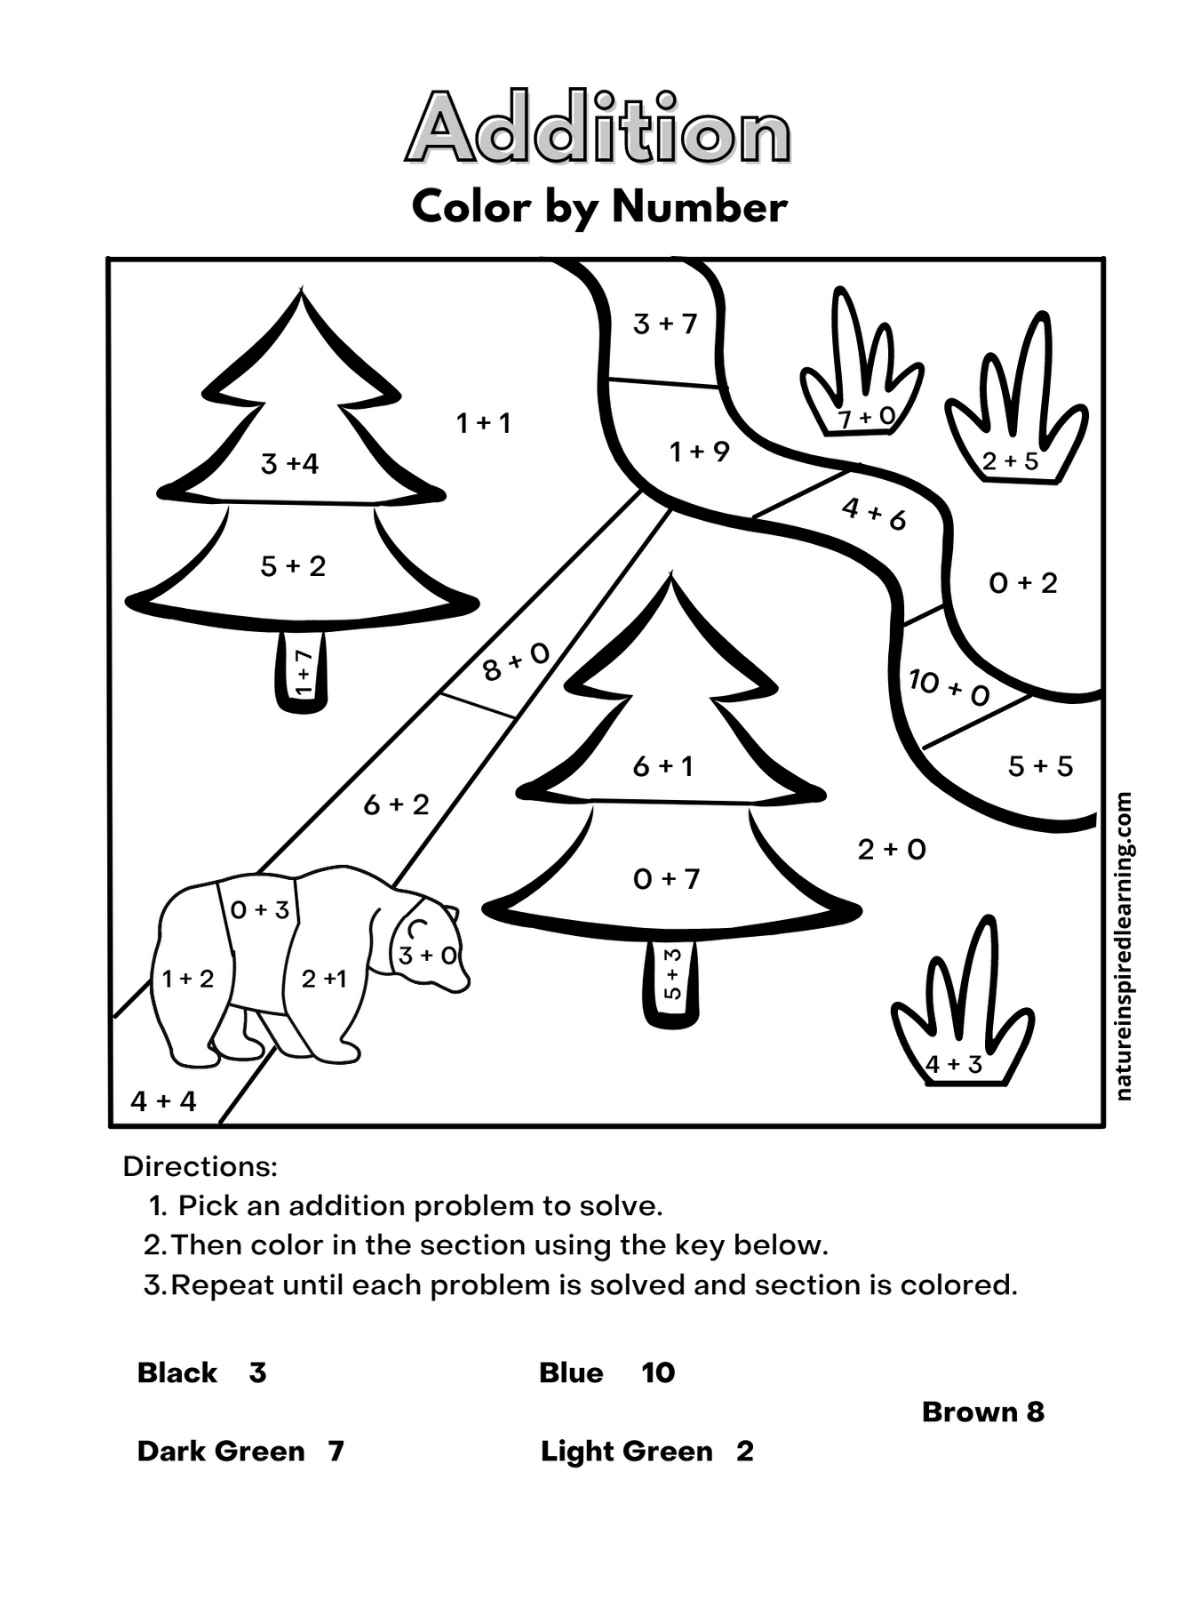 worksheet with color by number single digit addition with evergreen trees, a stream, and a bear.